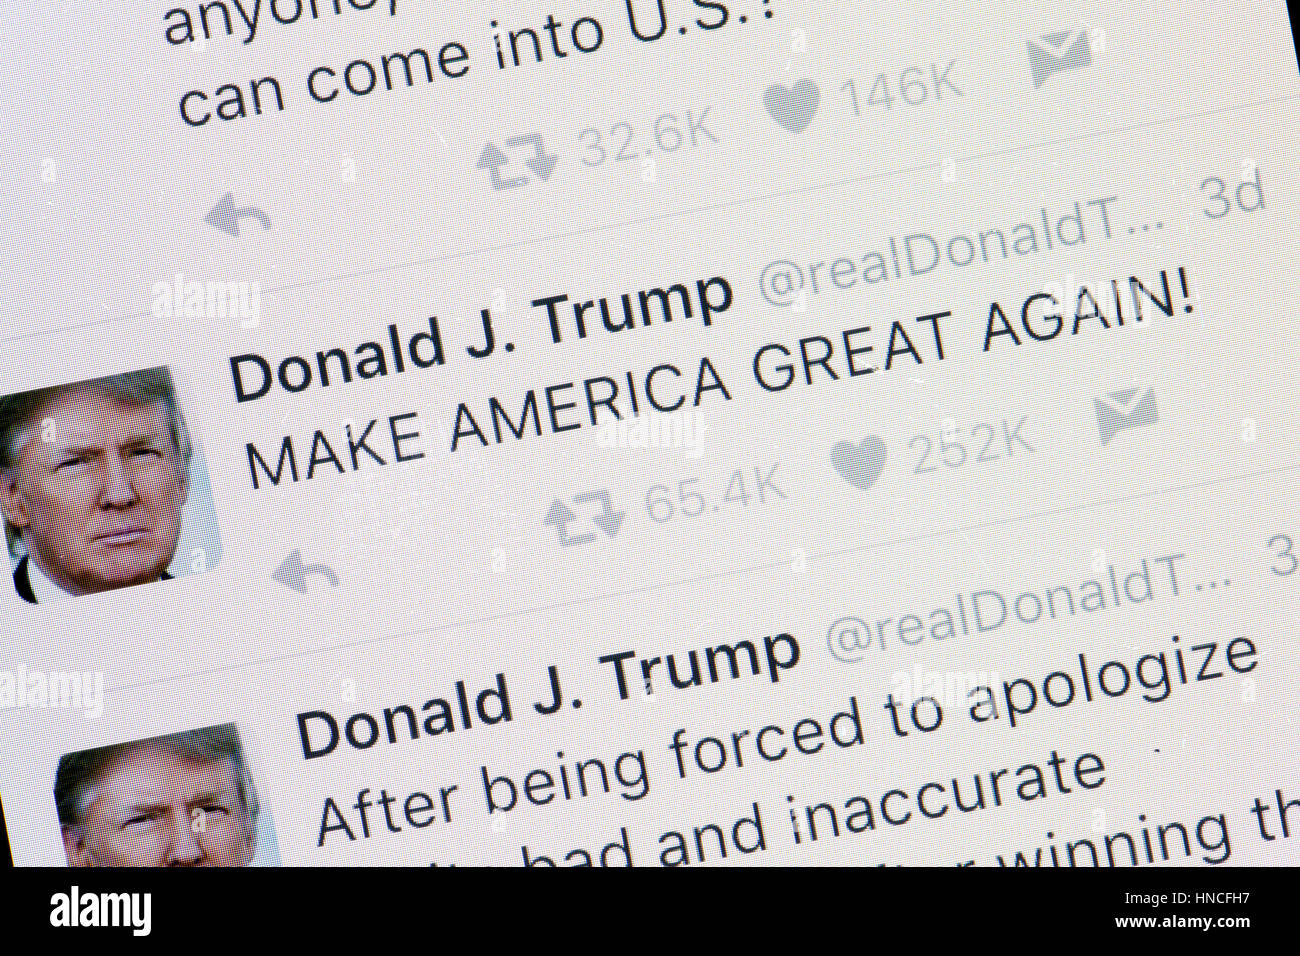 Donald Trump's twitter account with 'Make America Great Again' tweet on mobile phone screen - USA Stock Photo